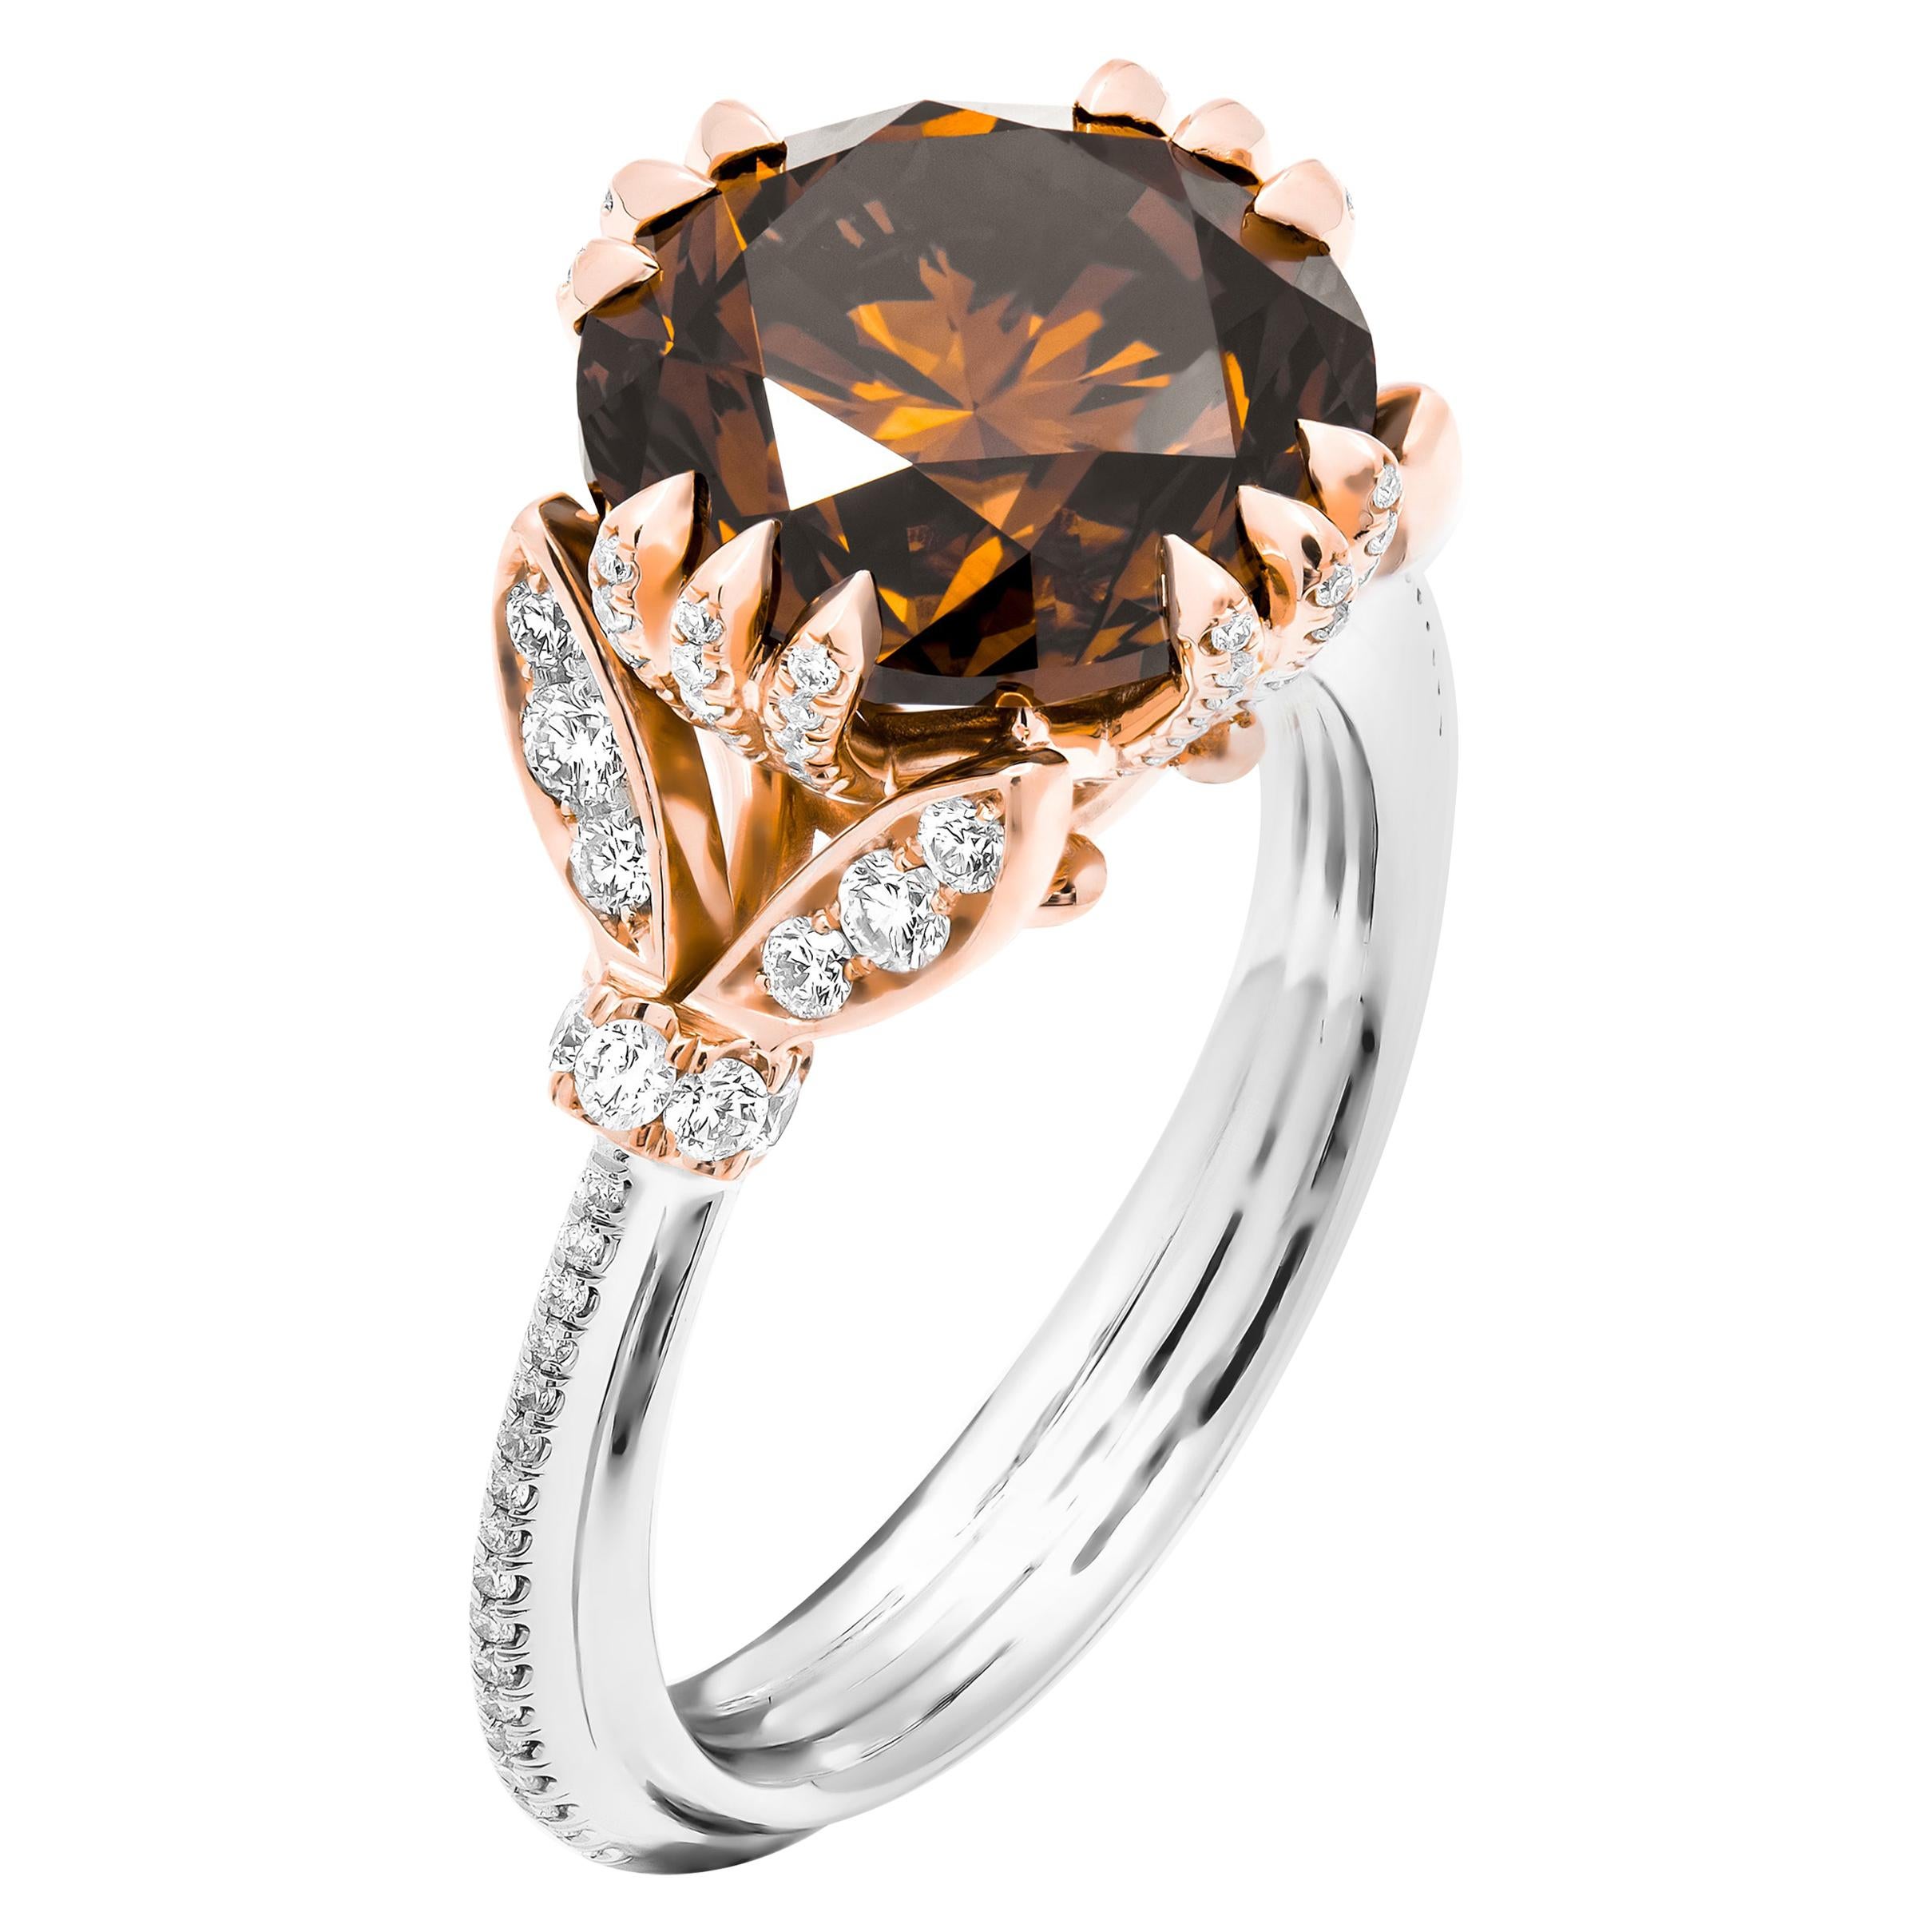 GIA Certified Fancy Orange Brown Diamond Cocktail Ring For Sale